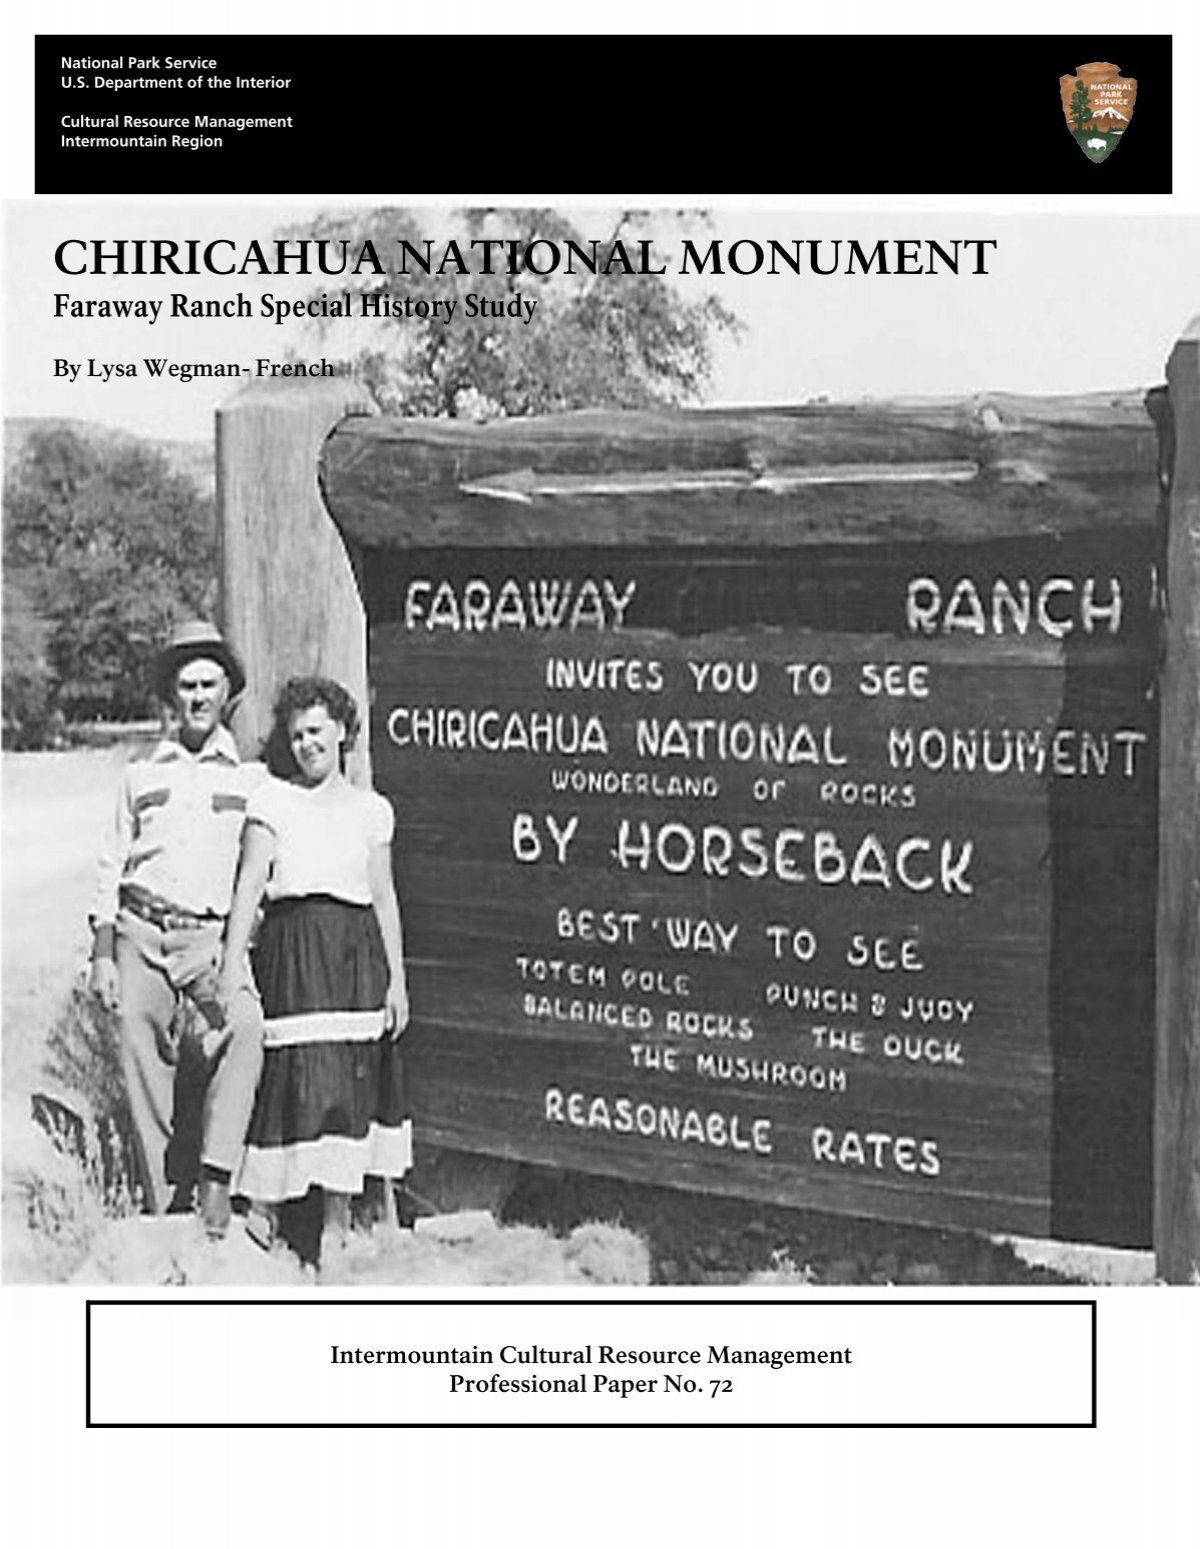 CHIRICAHUA NATIONAL MONUMENT - National Park Service